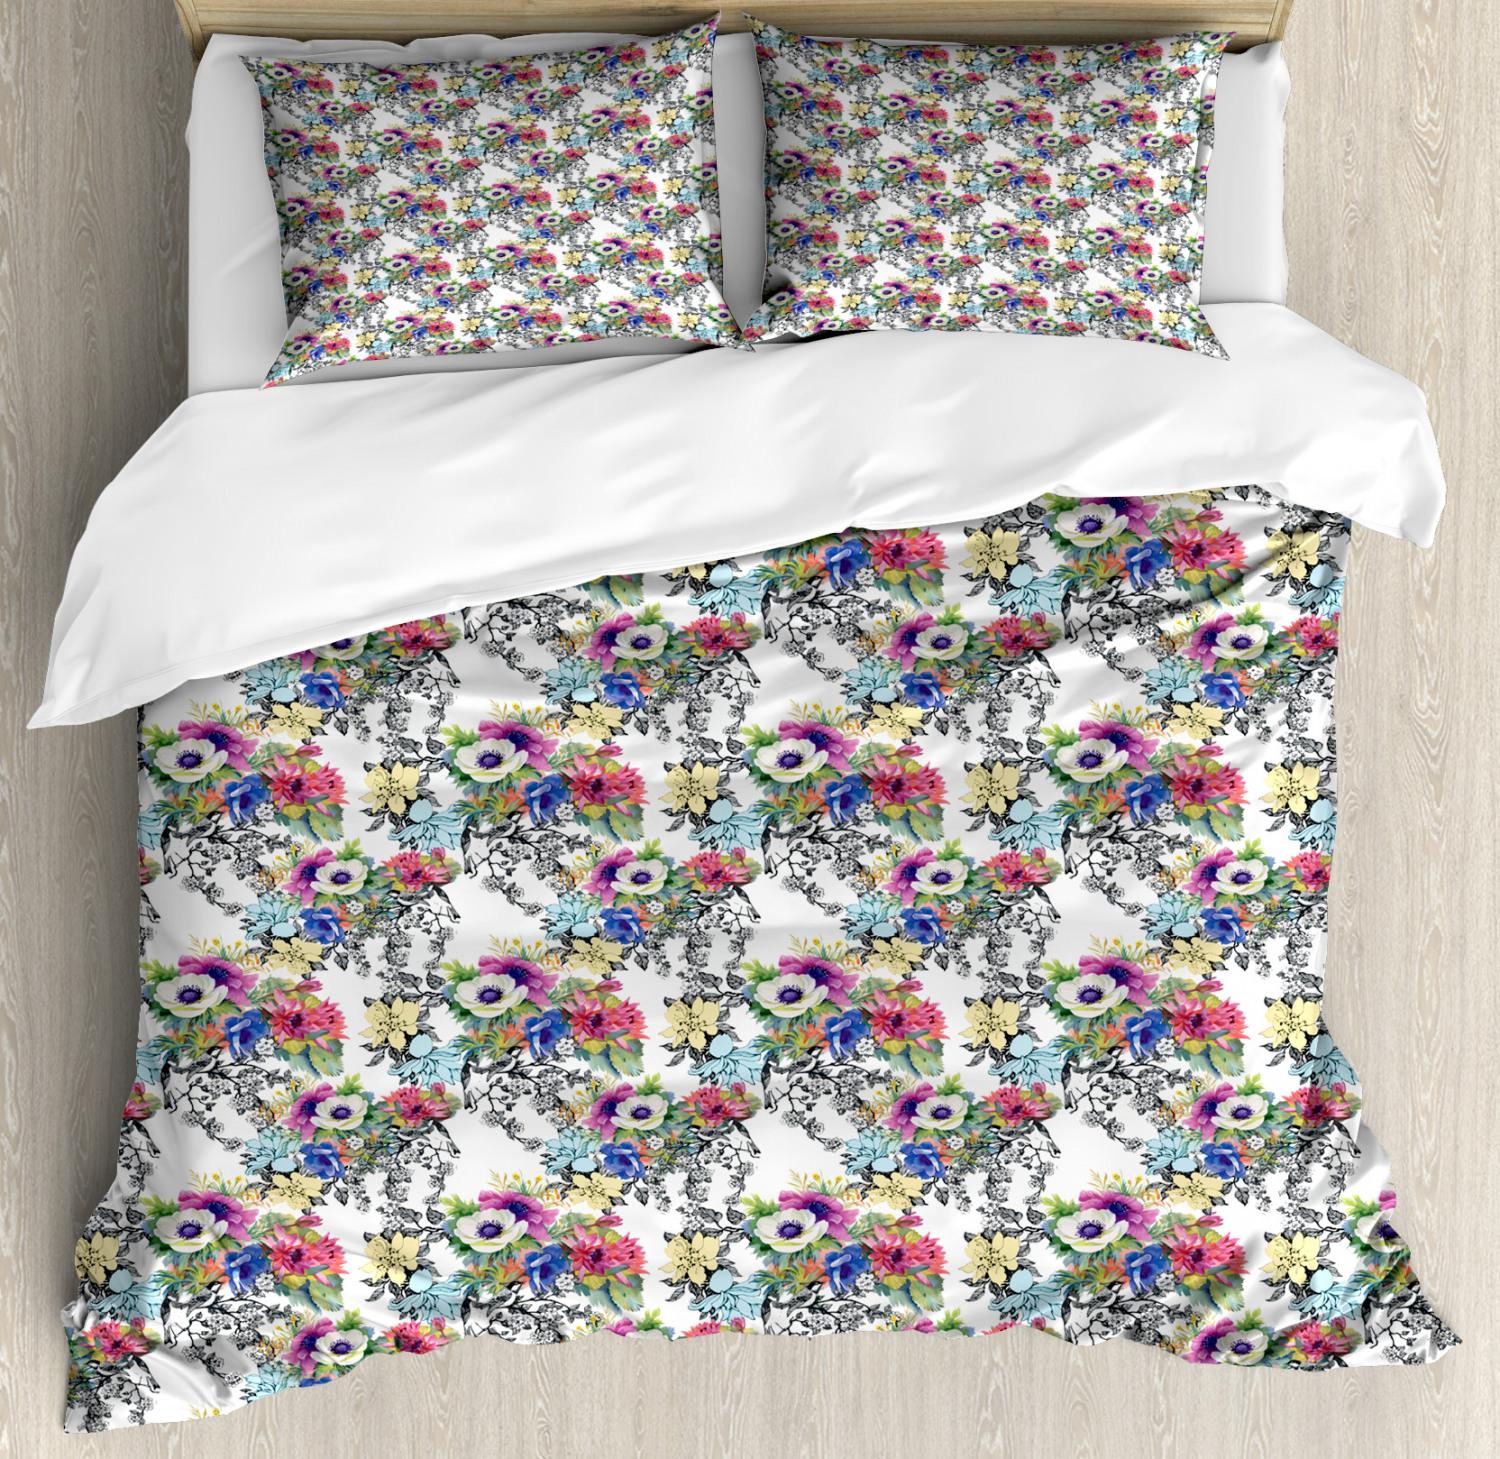 Colorful Garden Duvet Cover Set Twin Queen King Sizes with Pillow Shams